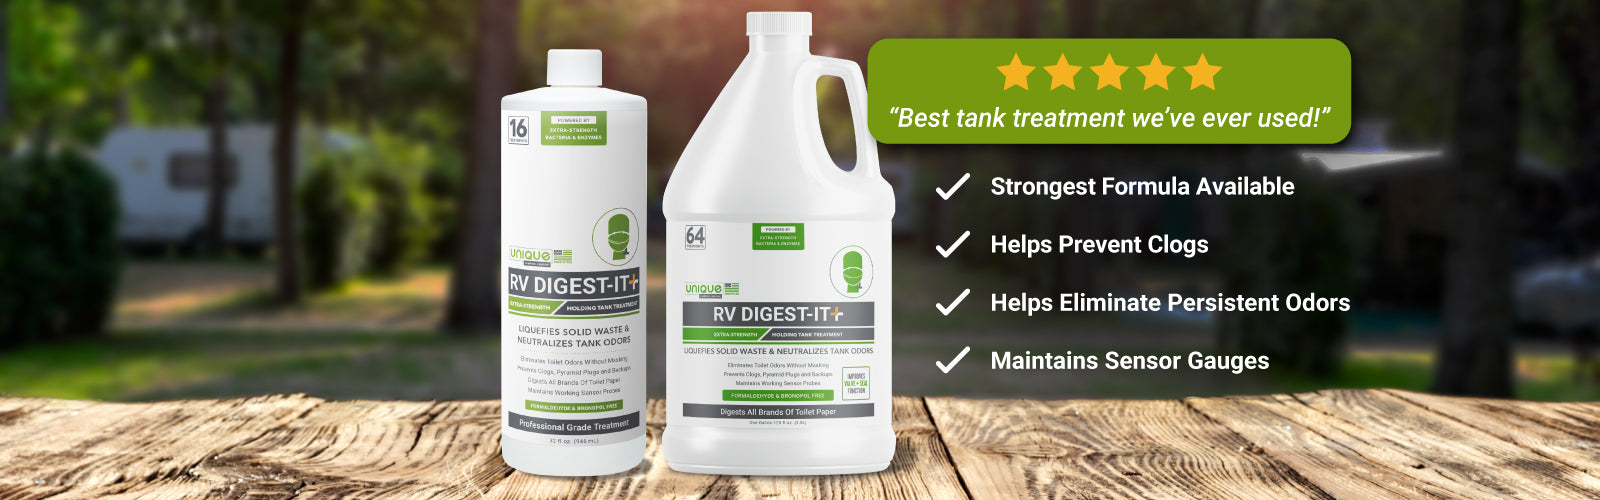 RV Digest-It Plus Extra Strength Holding Tank Treatment. Unique Camping + Marine